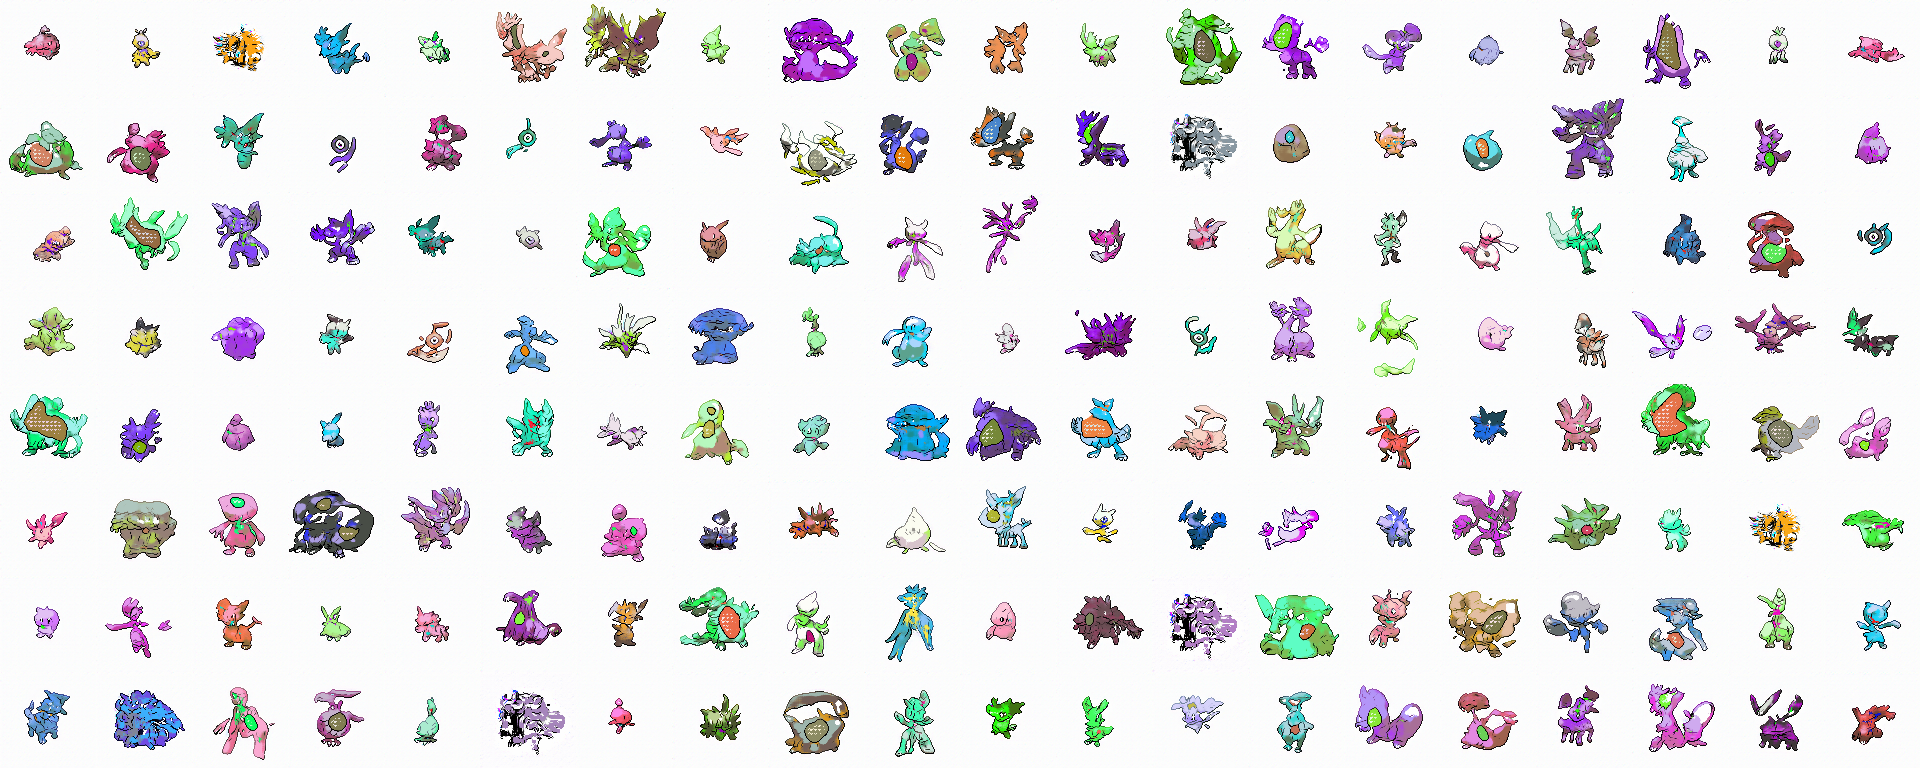 Creating your own AI-generated Pokemon world: From unique Pokemon